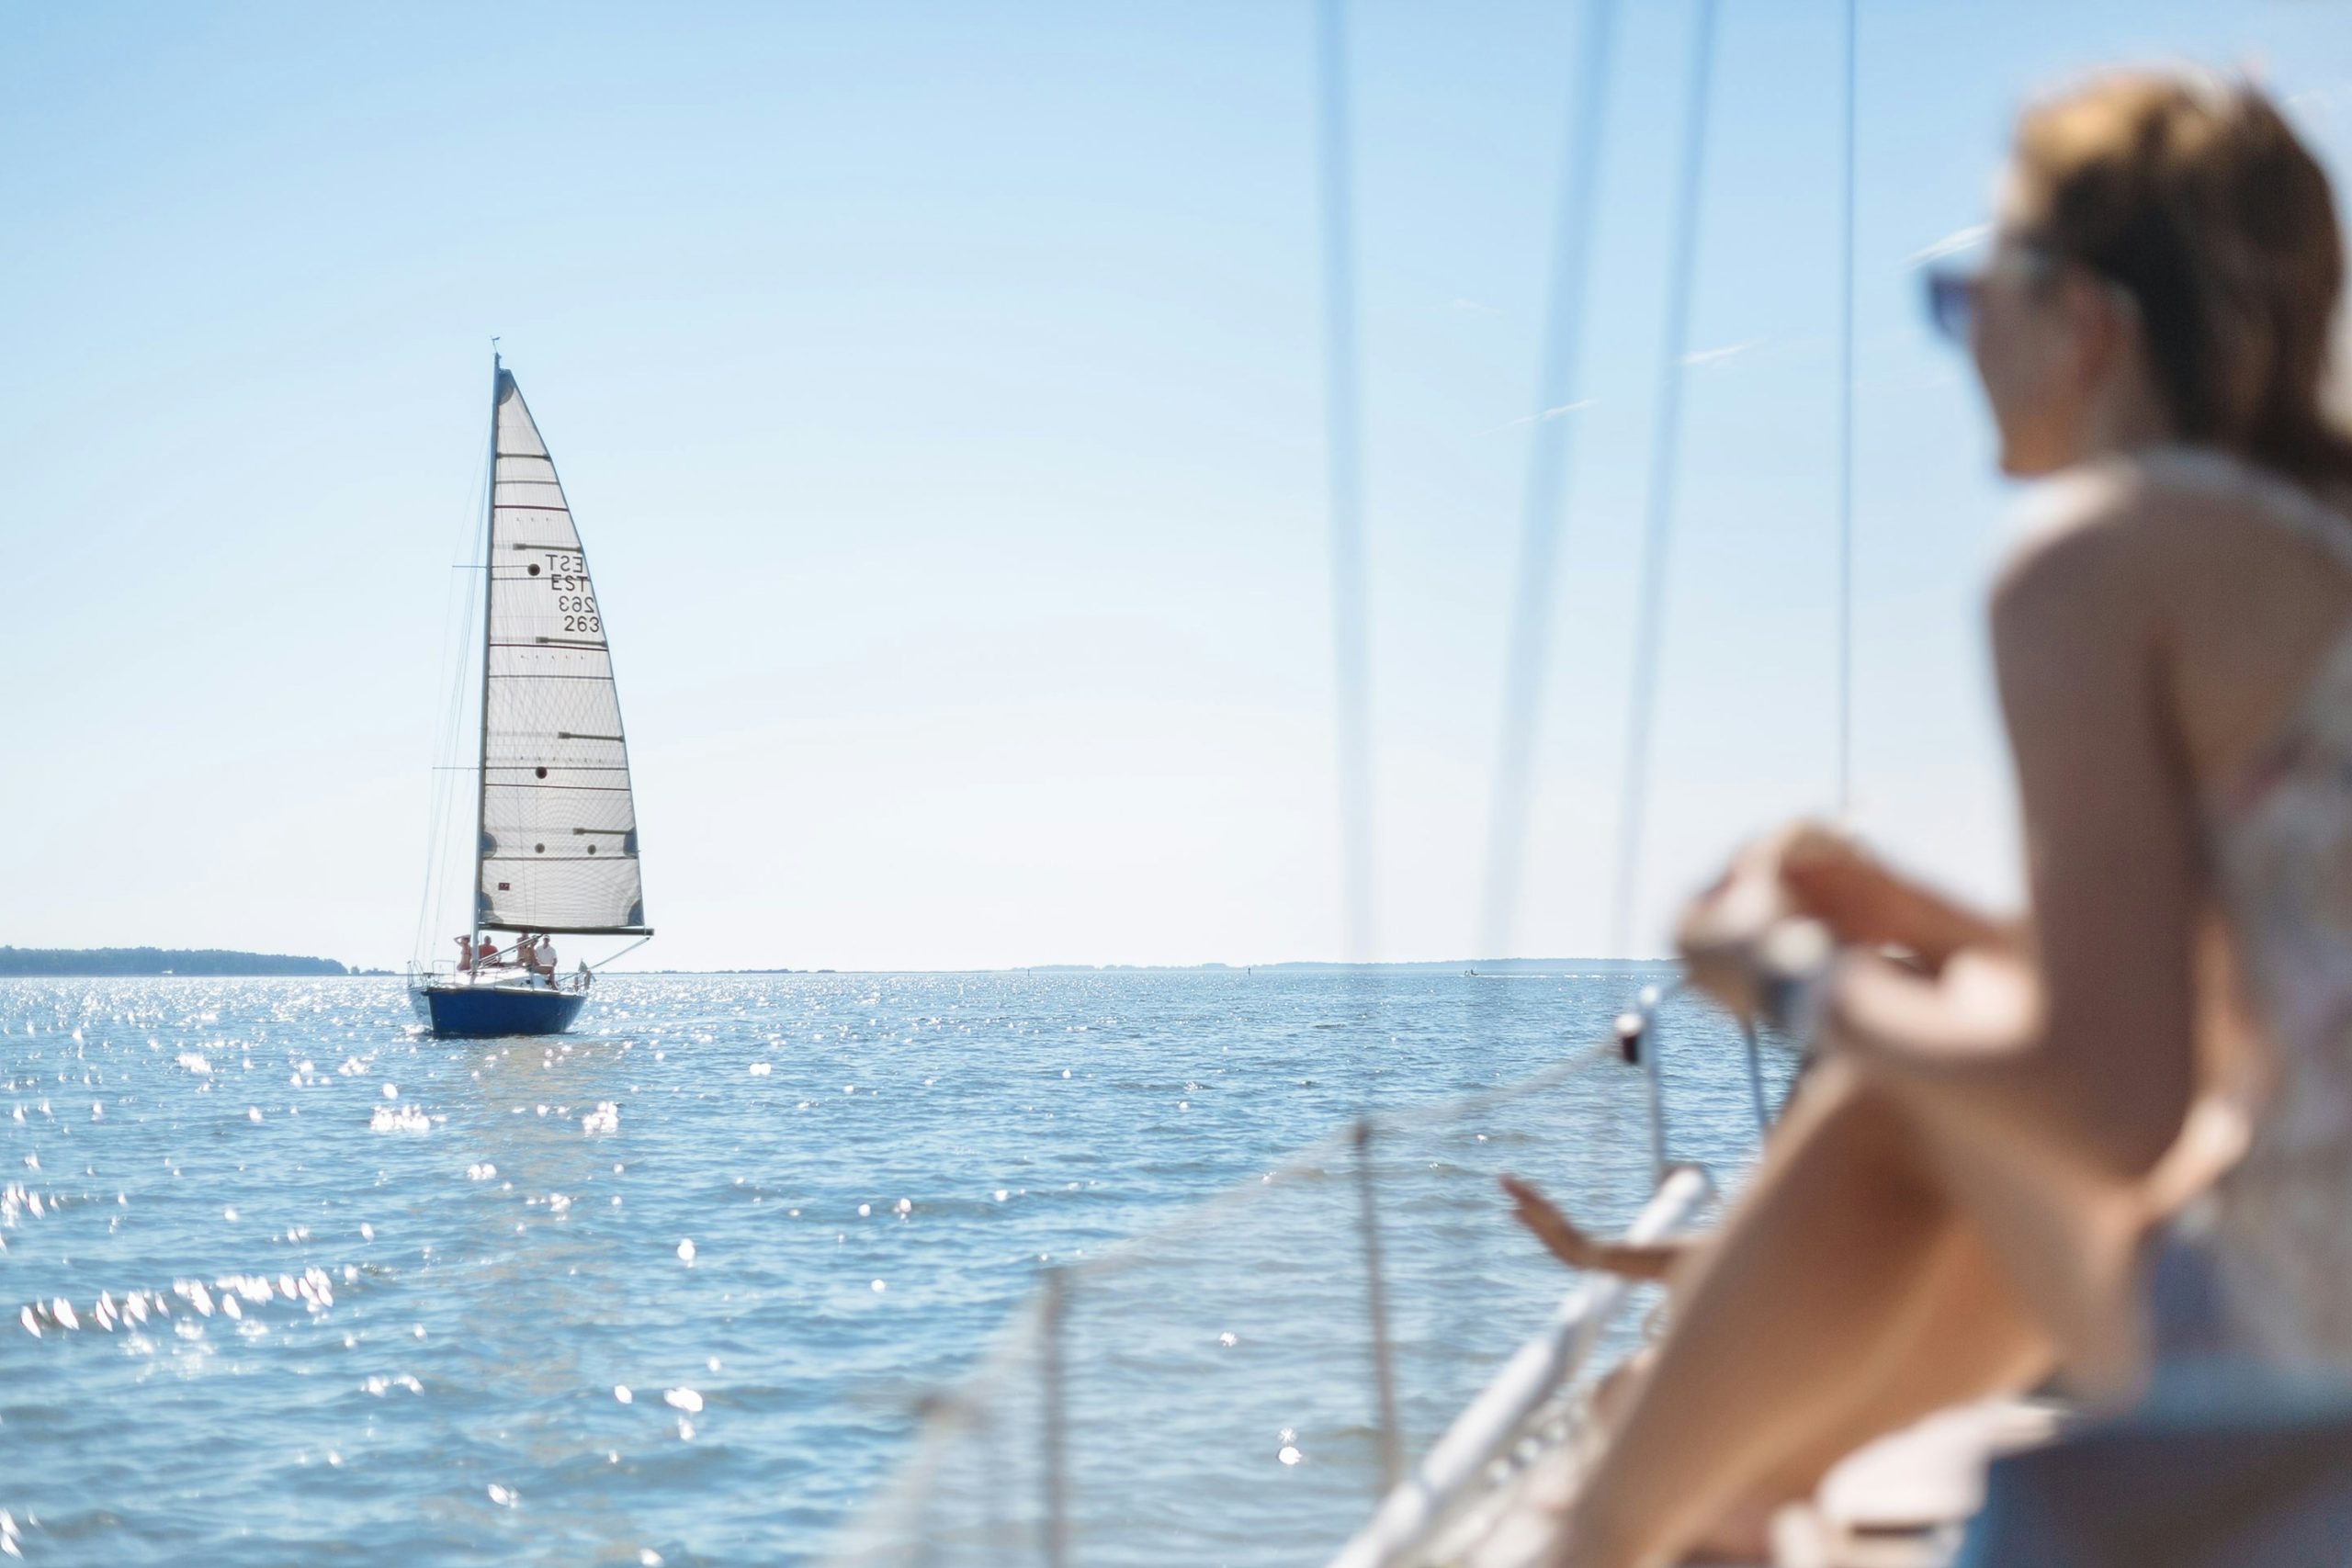 explore the beauty of the open sea with our sailing adventures. find your next journey with us and experience the thrill of the ocean.